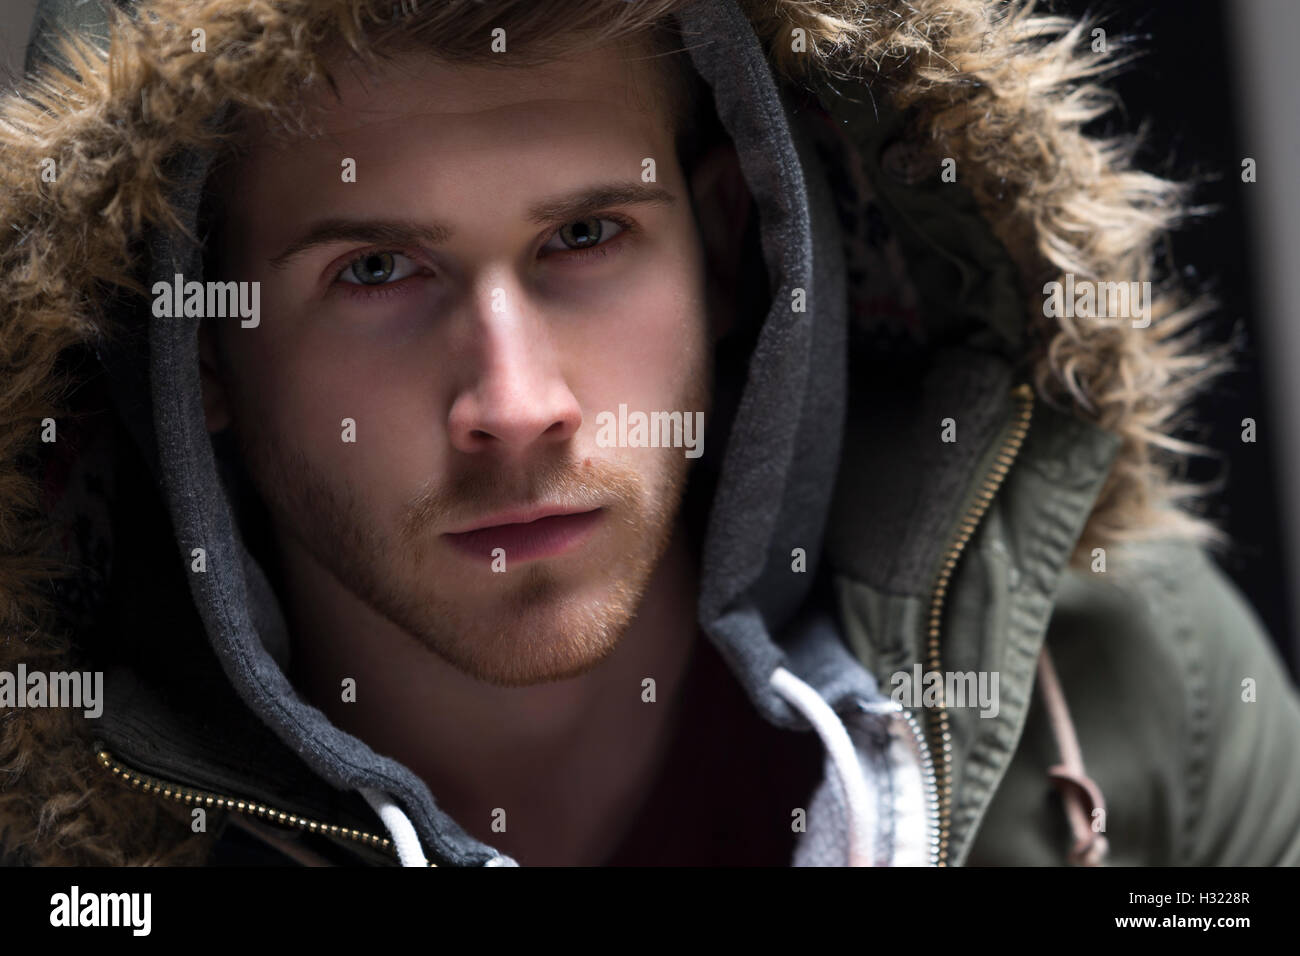 Close up portrait of a young man posing with his hood up. Stock Photo